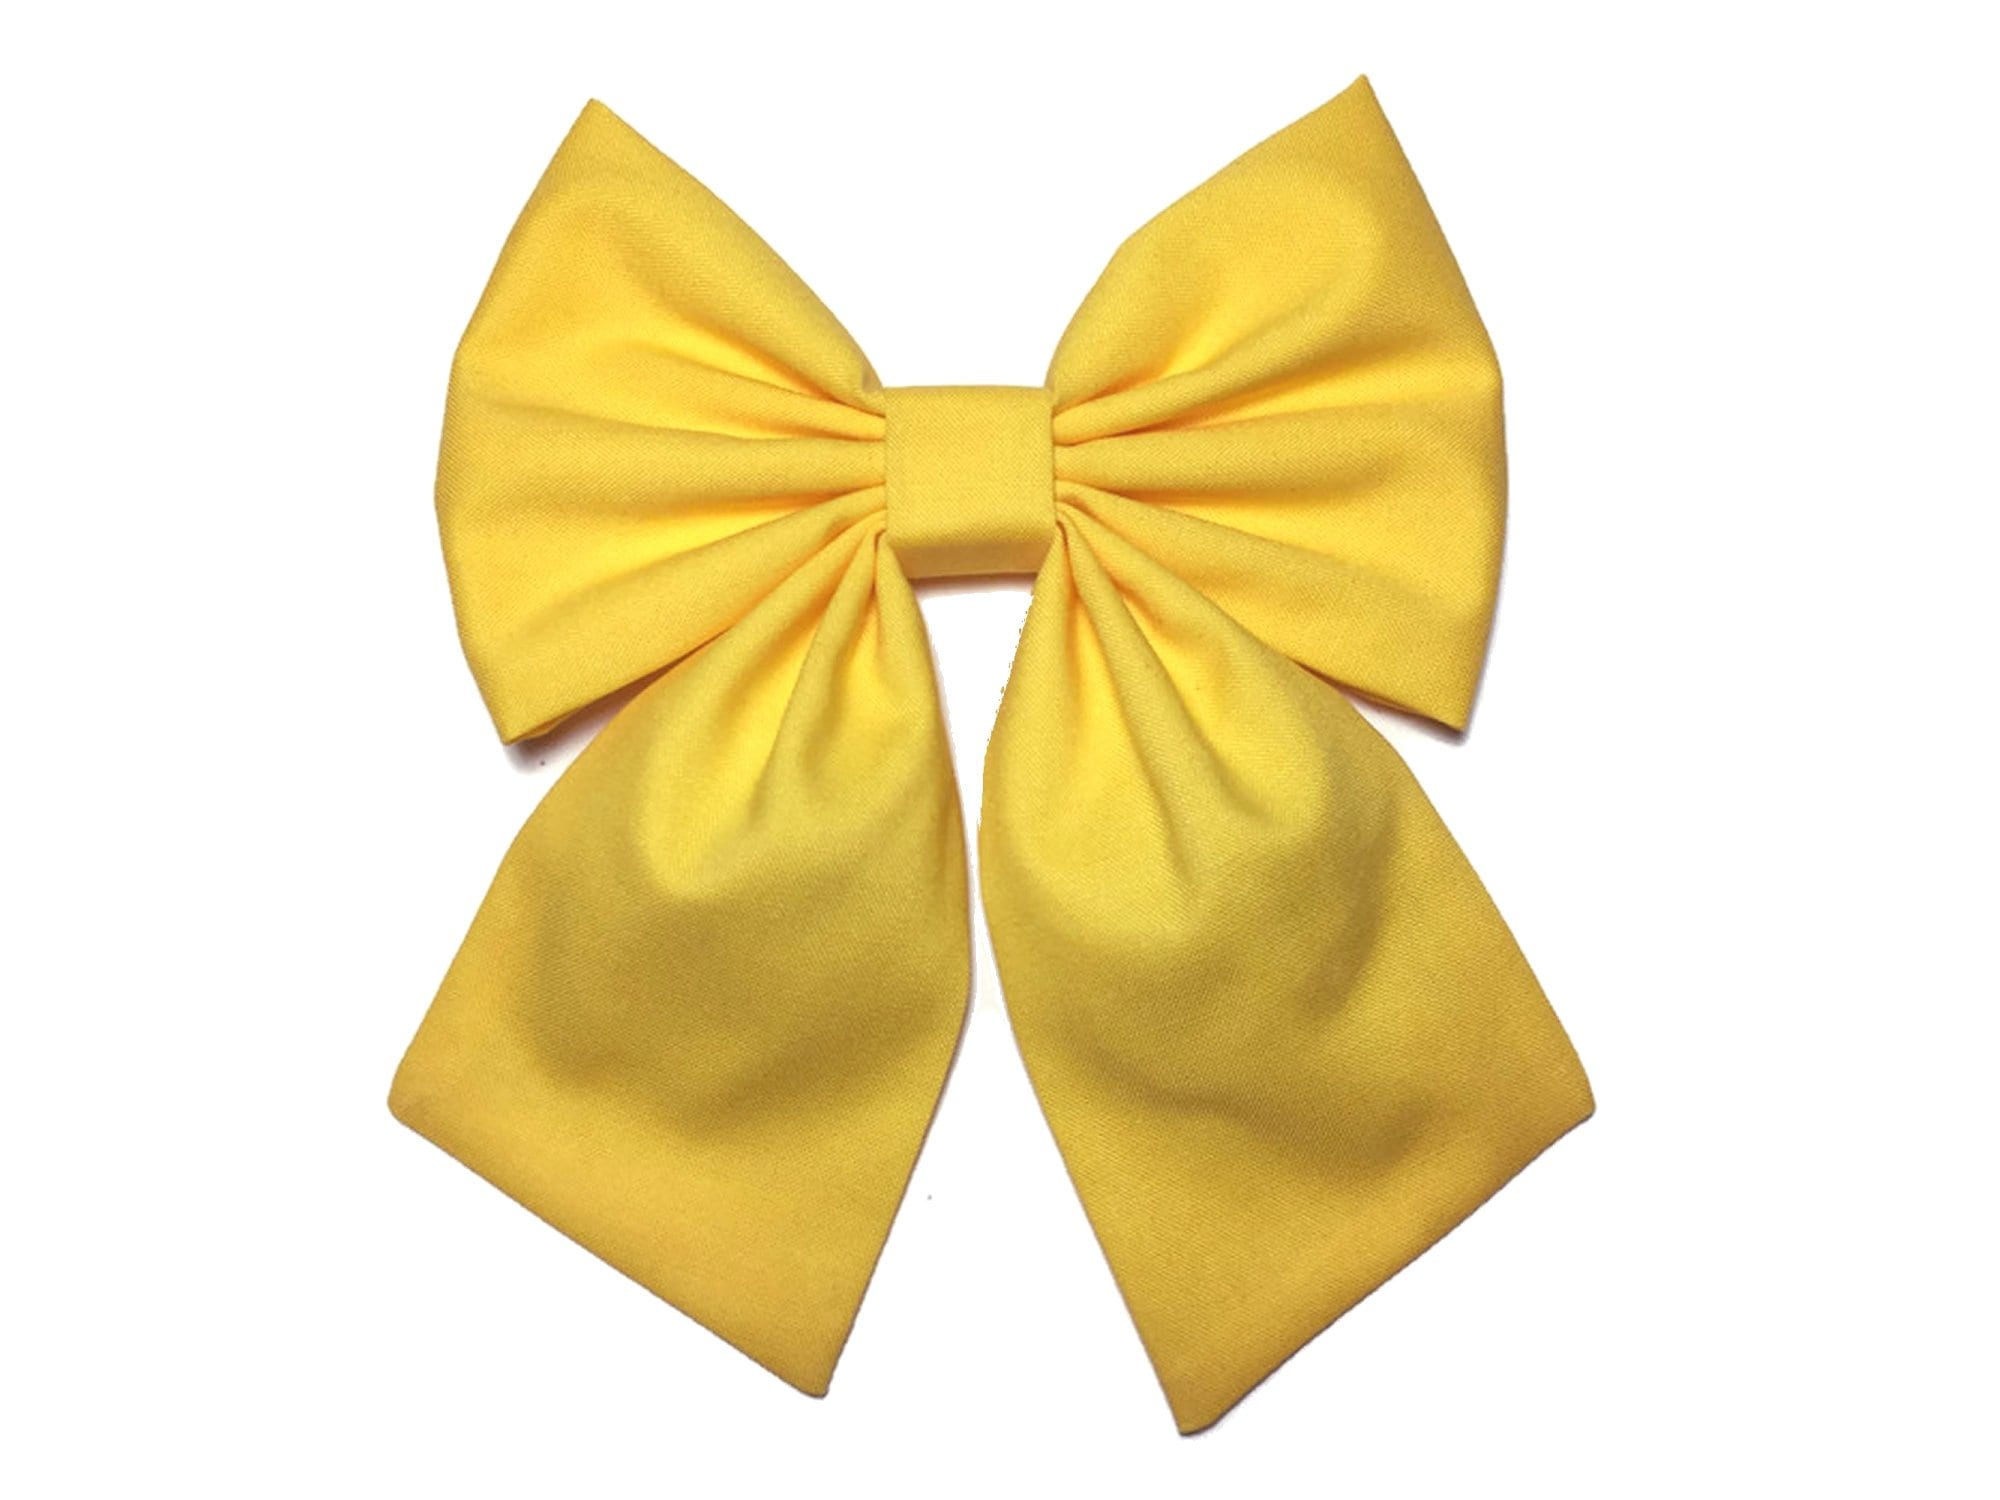 Blue and Yellow Hair Bow Set - wide 9